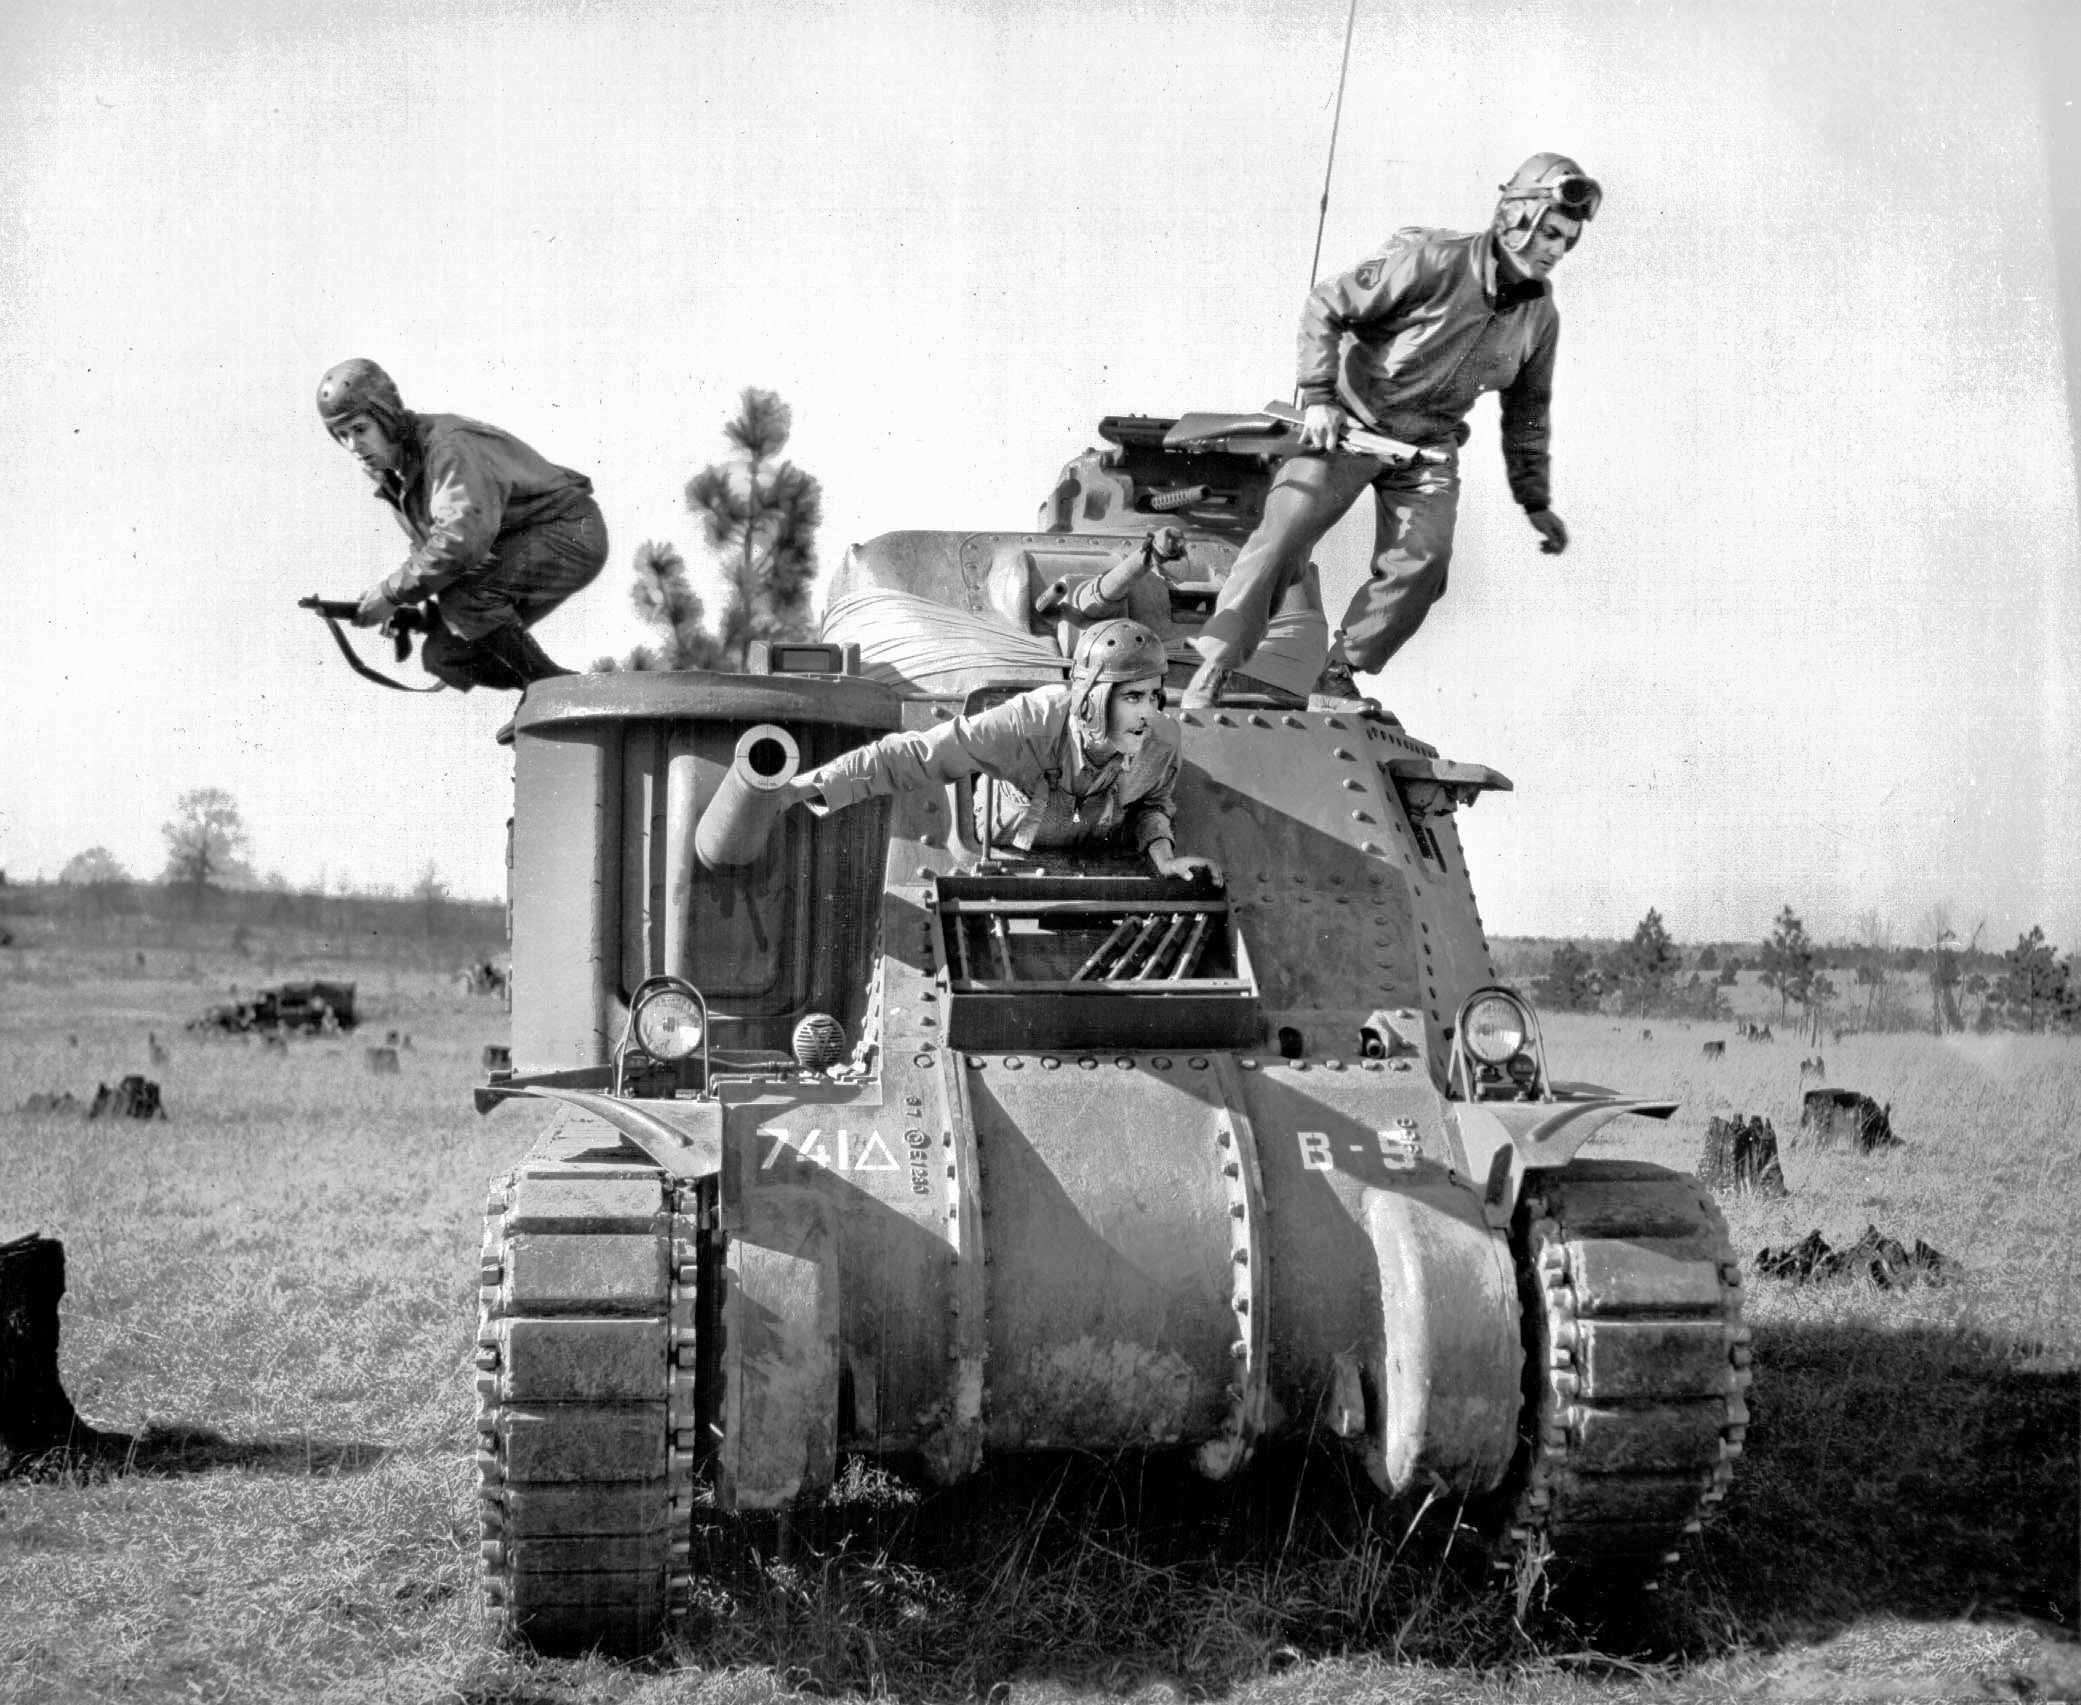 During Third Army maneuvers at Camp Polk, Louisiana, in February 1943, crewmen of the 741st Tank Battalion make a rapid exit from their Grant tank while carrying small arms.